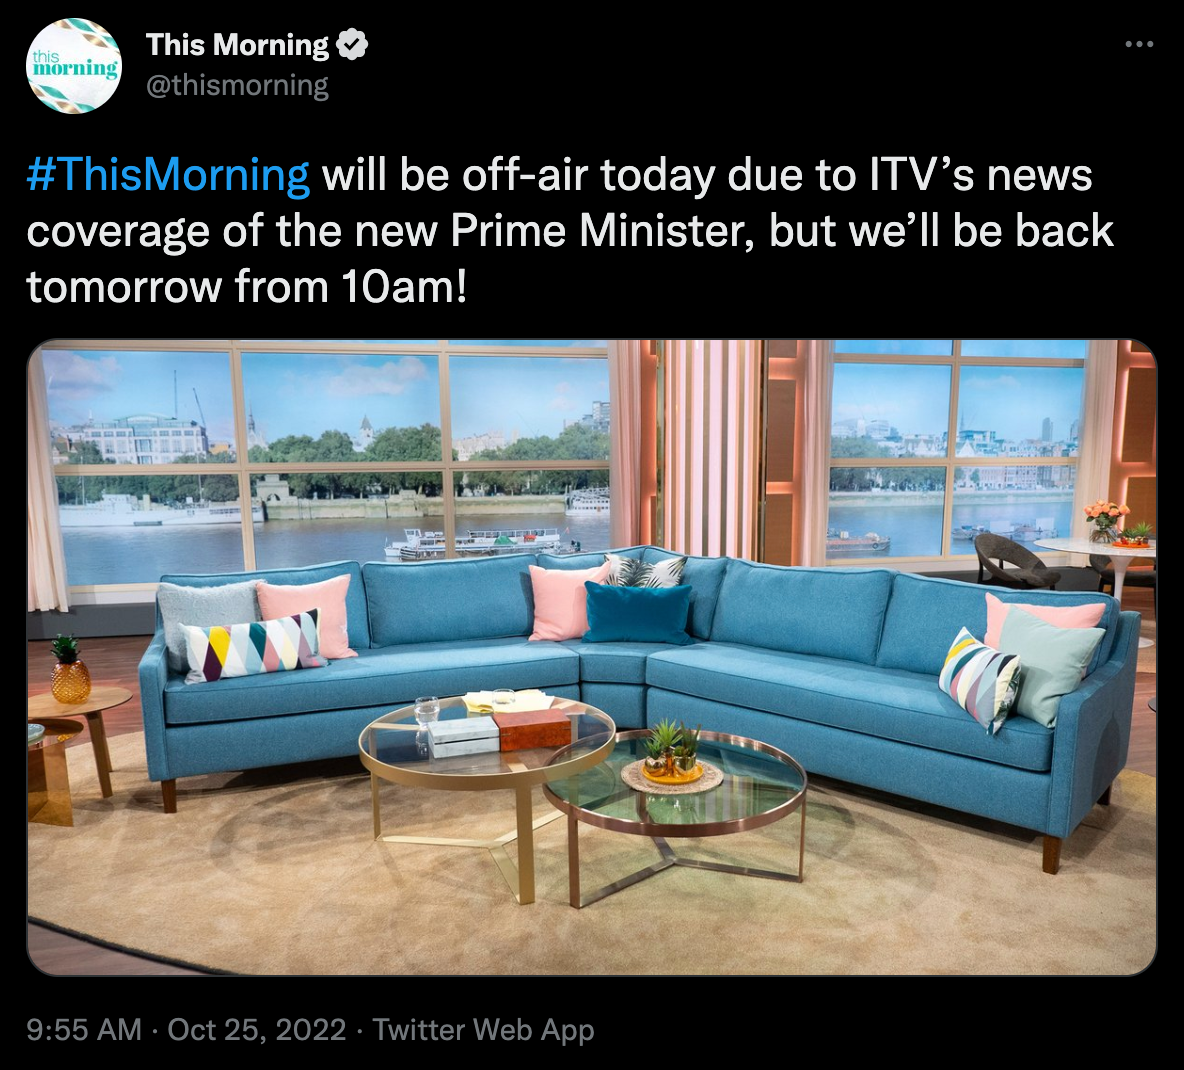 ‘This Morning’s Tuesday episode (25 October) was cancelled